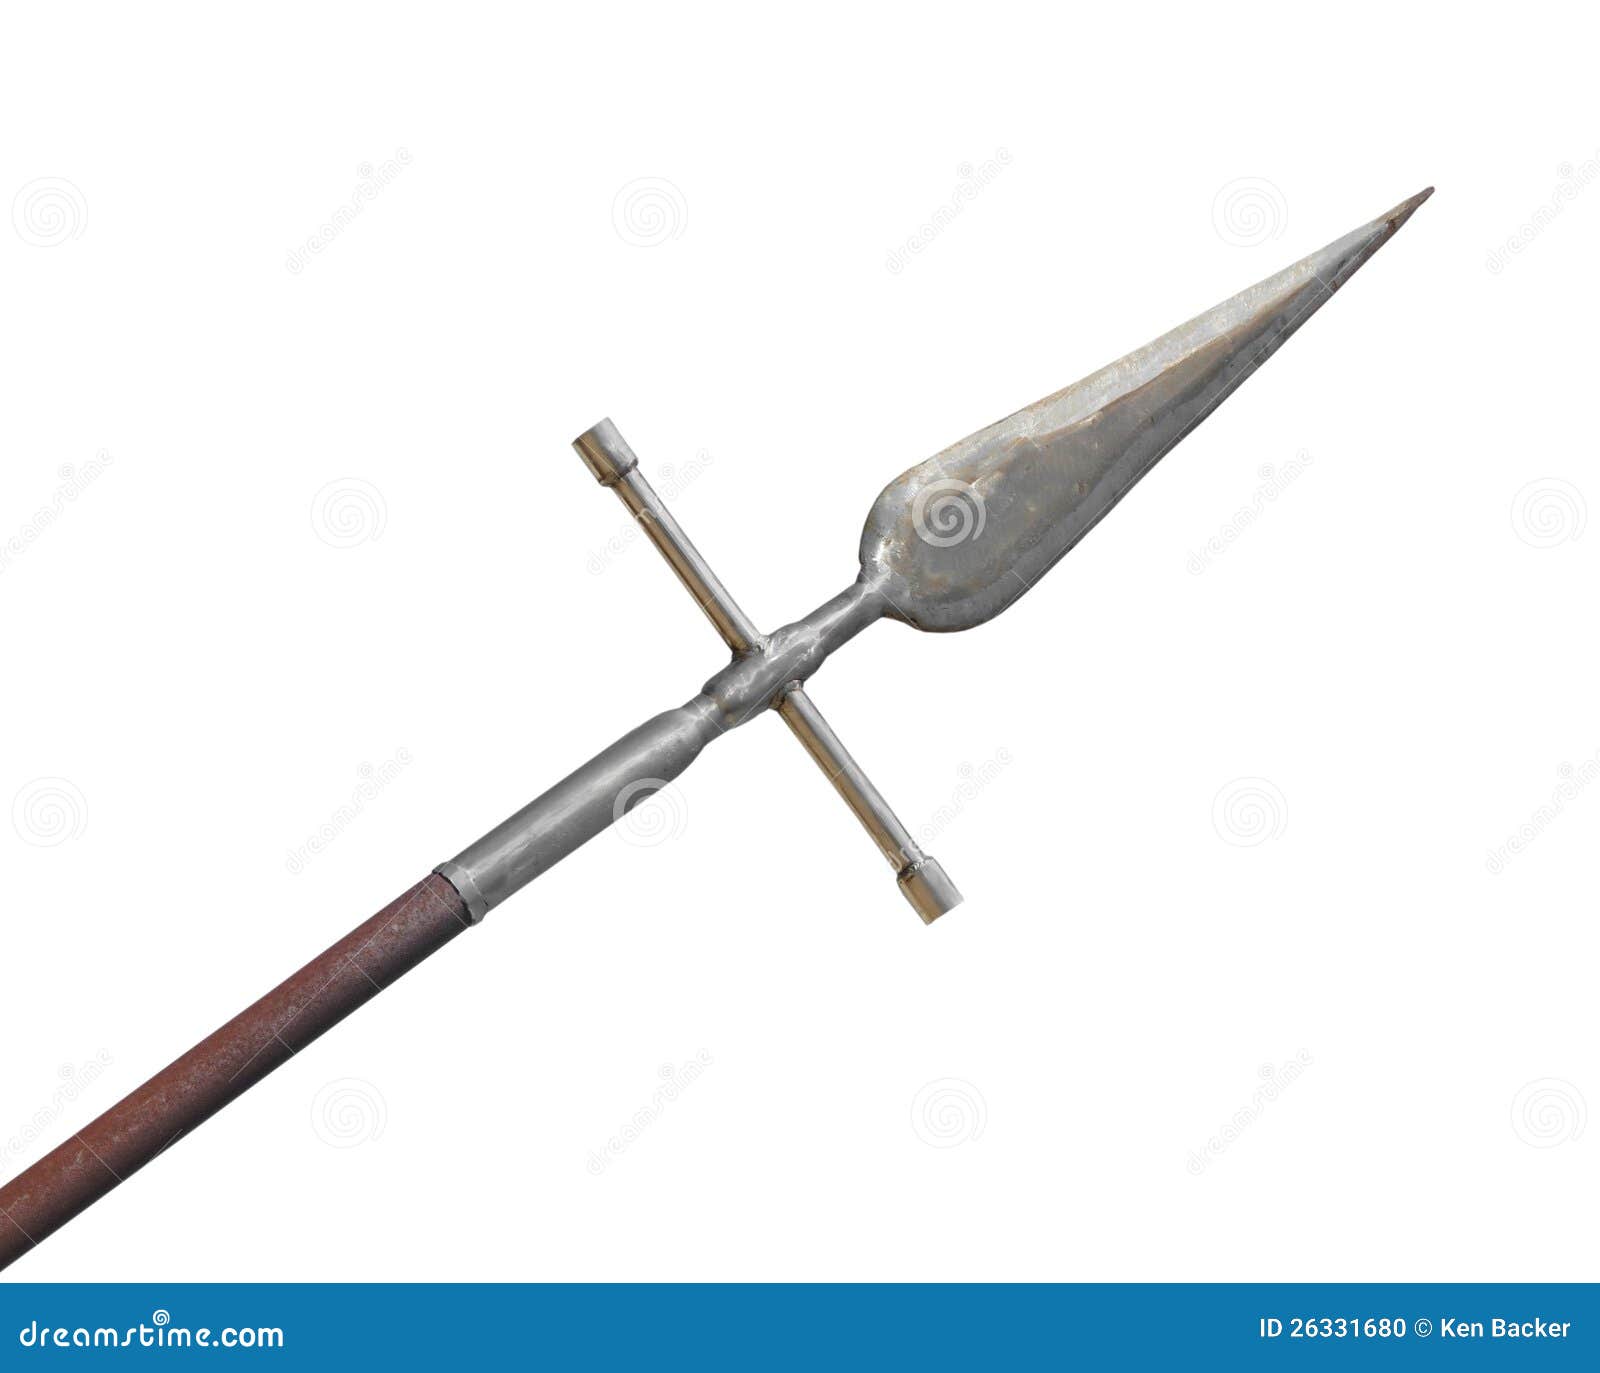 metal lance or spear head with shaft .